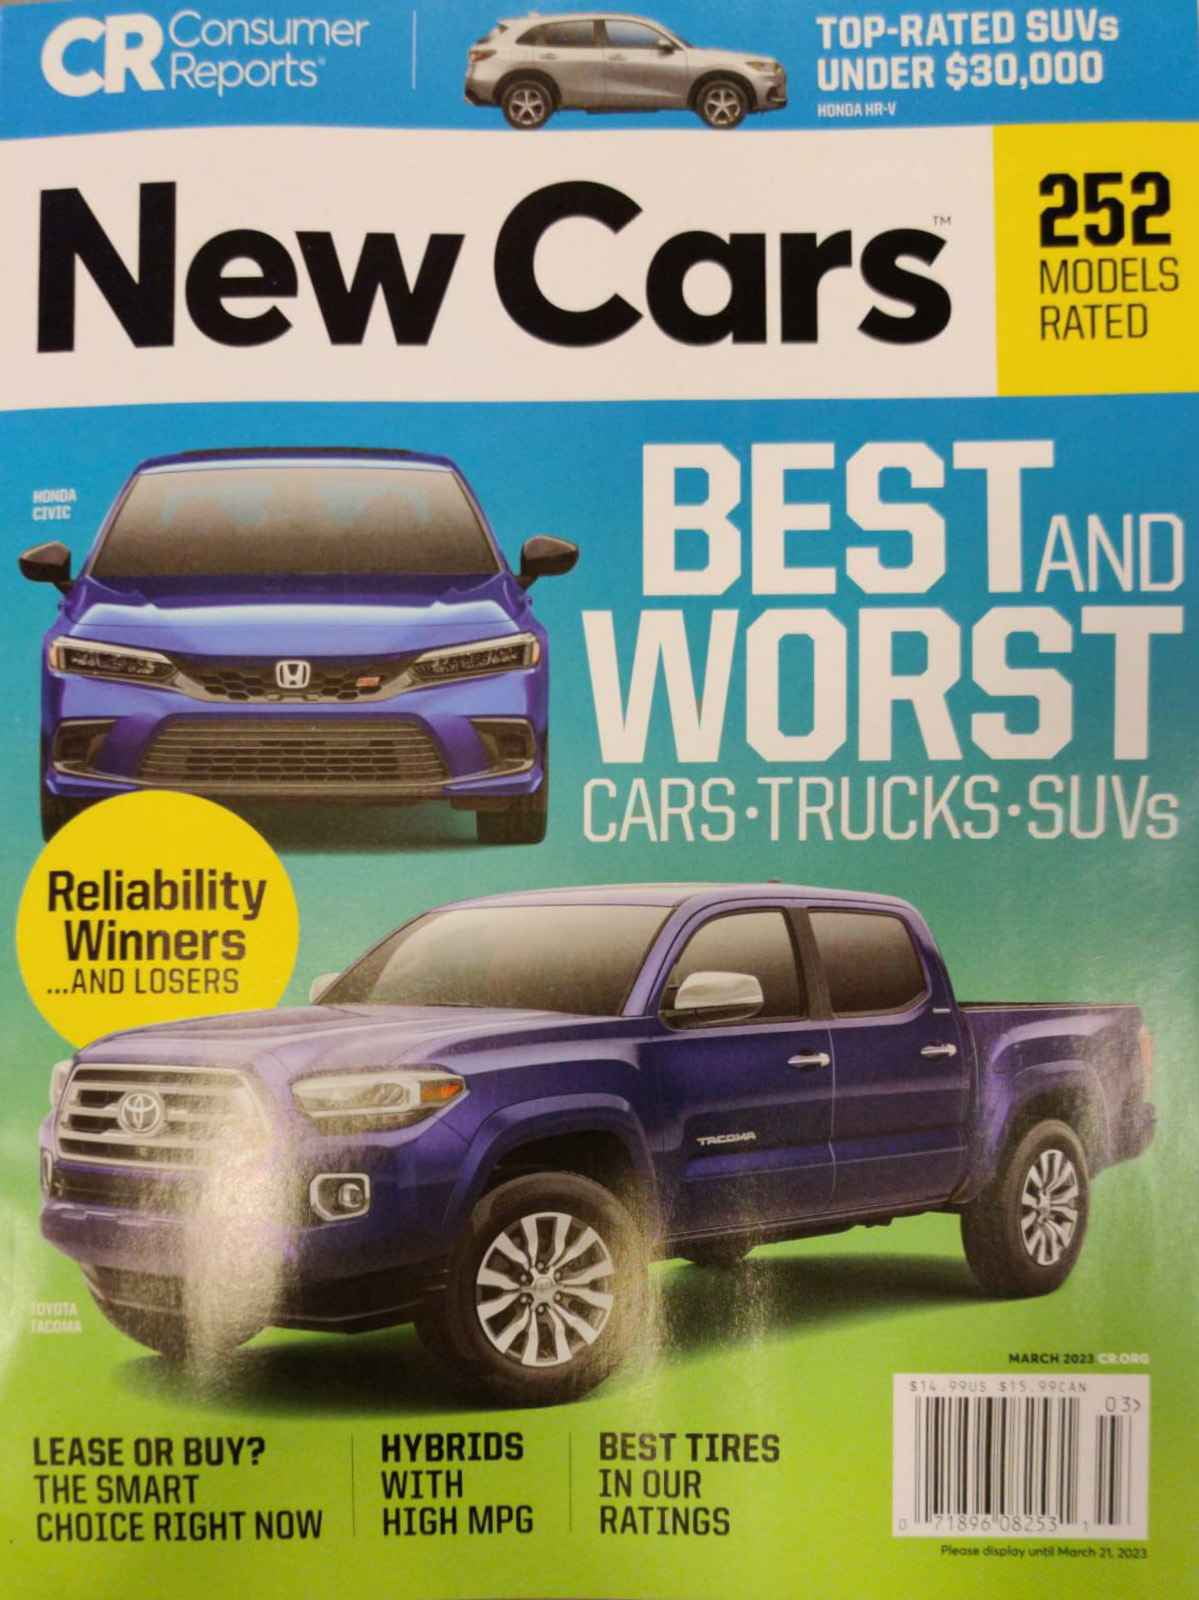 Best Cars and SUVs for Short People - Consumer Reports